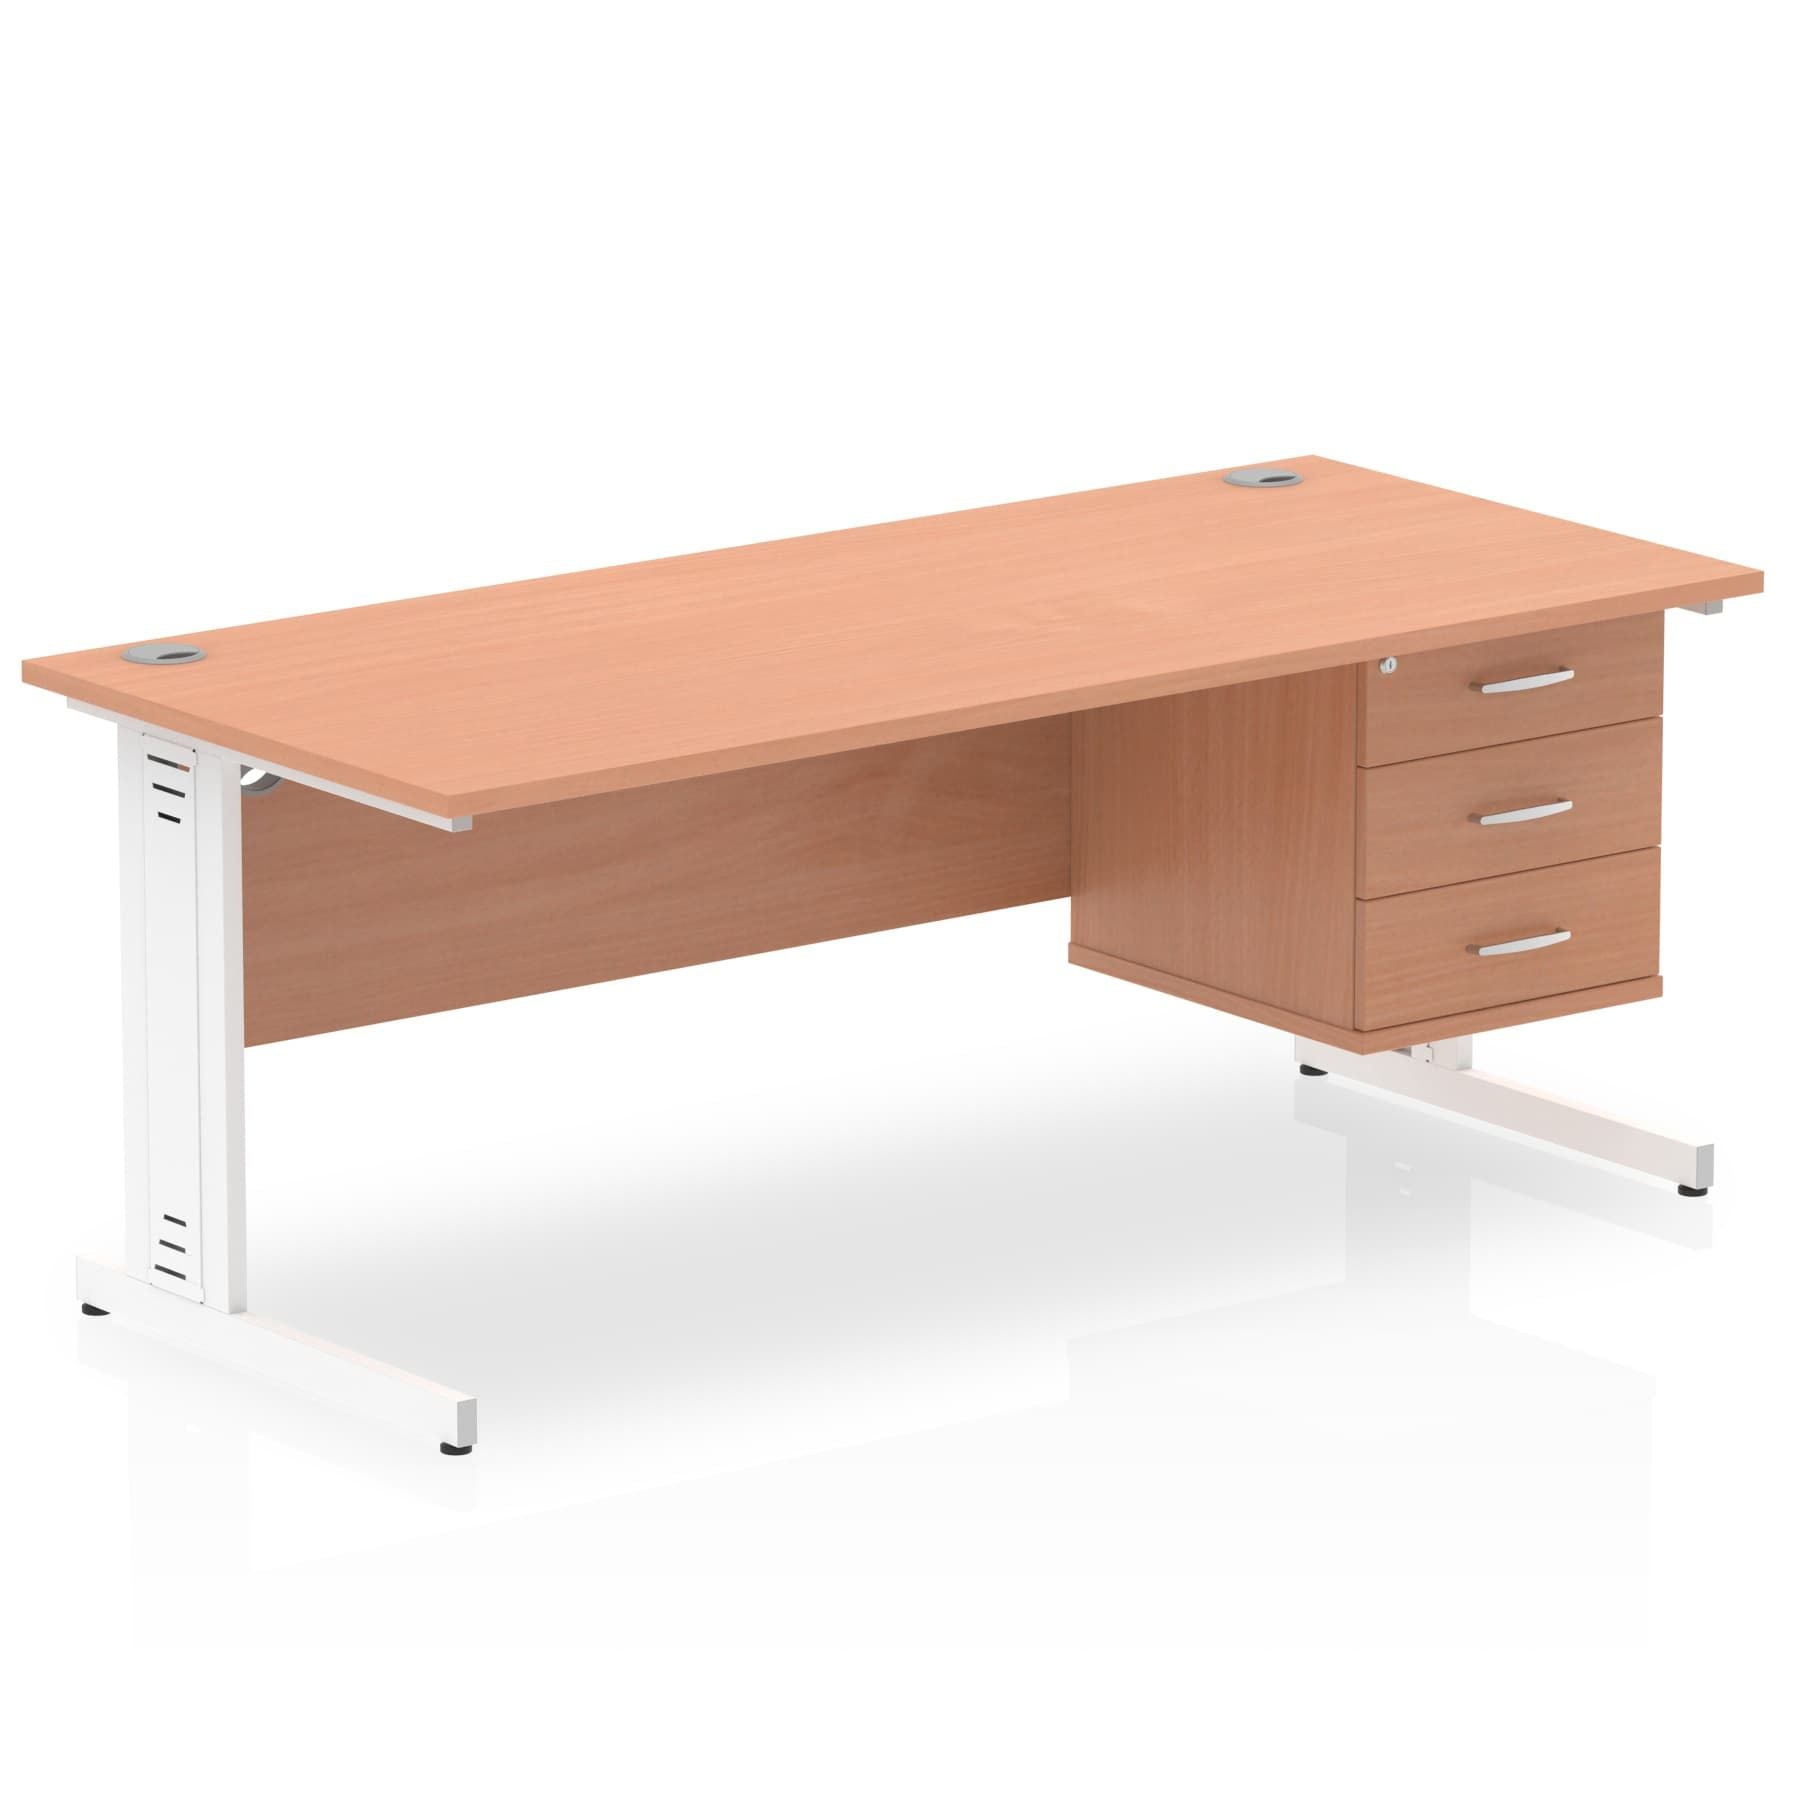 Impulse 1800mm Cable Managed Straight Desk w/ Fixed Pedestal - MFC Rectangular, Self-Assembly, 5-Year Guarantee, 1800x800 Top, Silver/White Frame